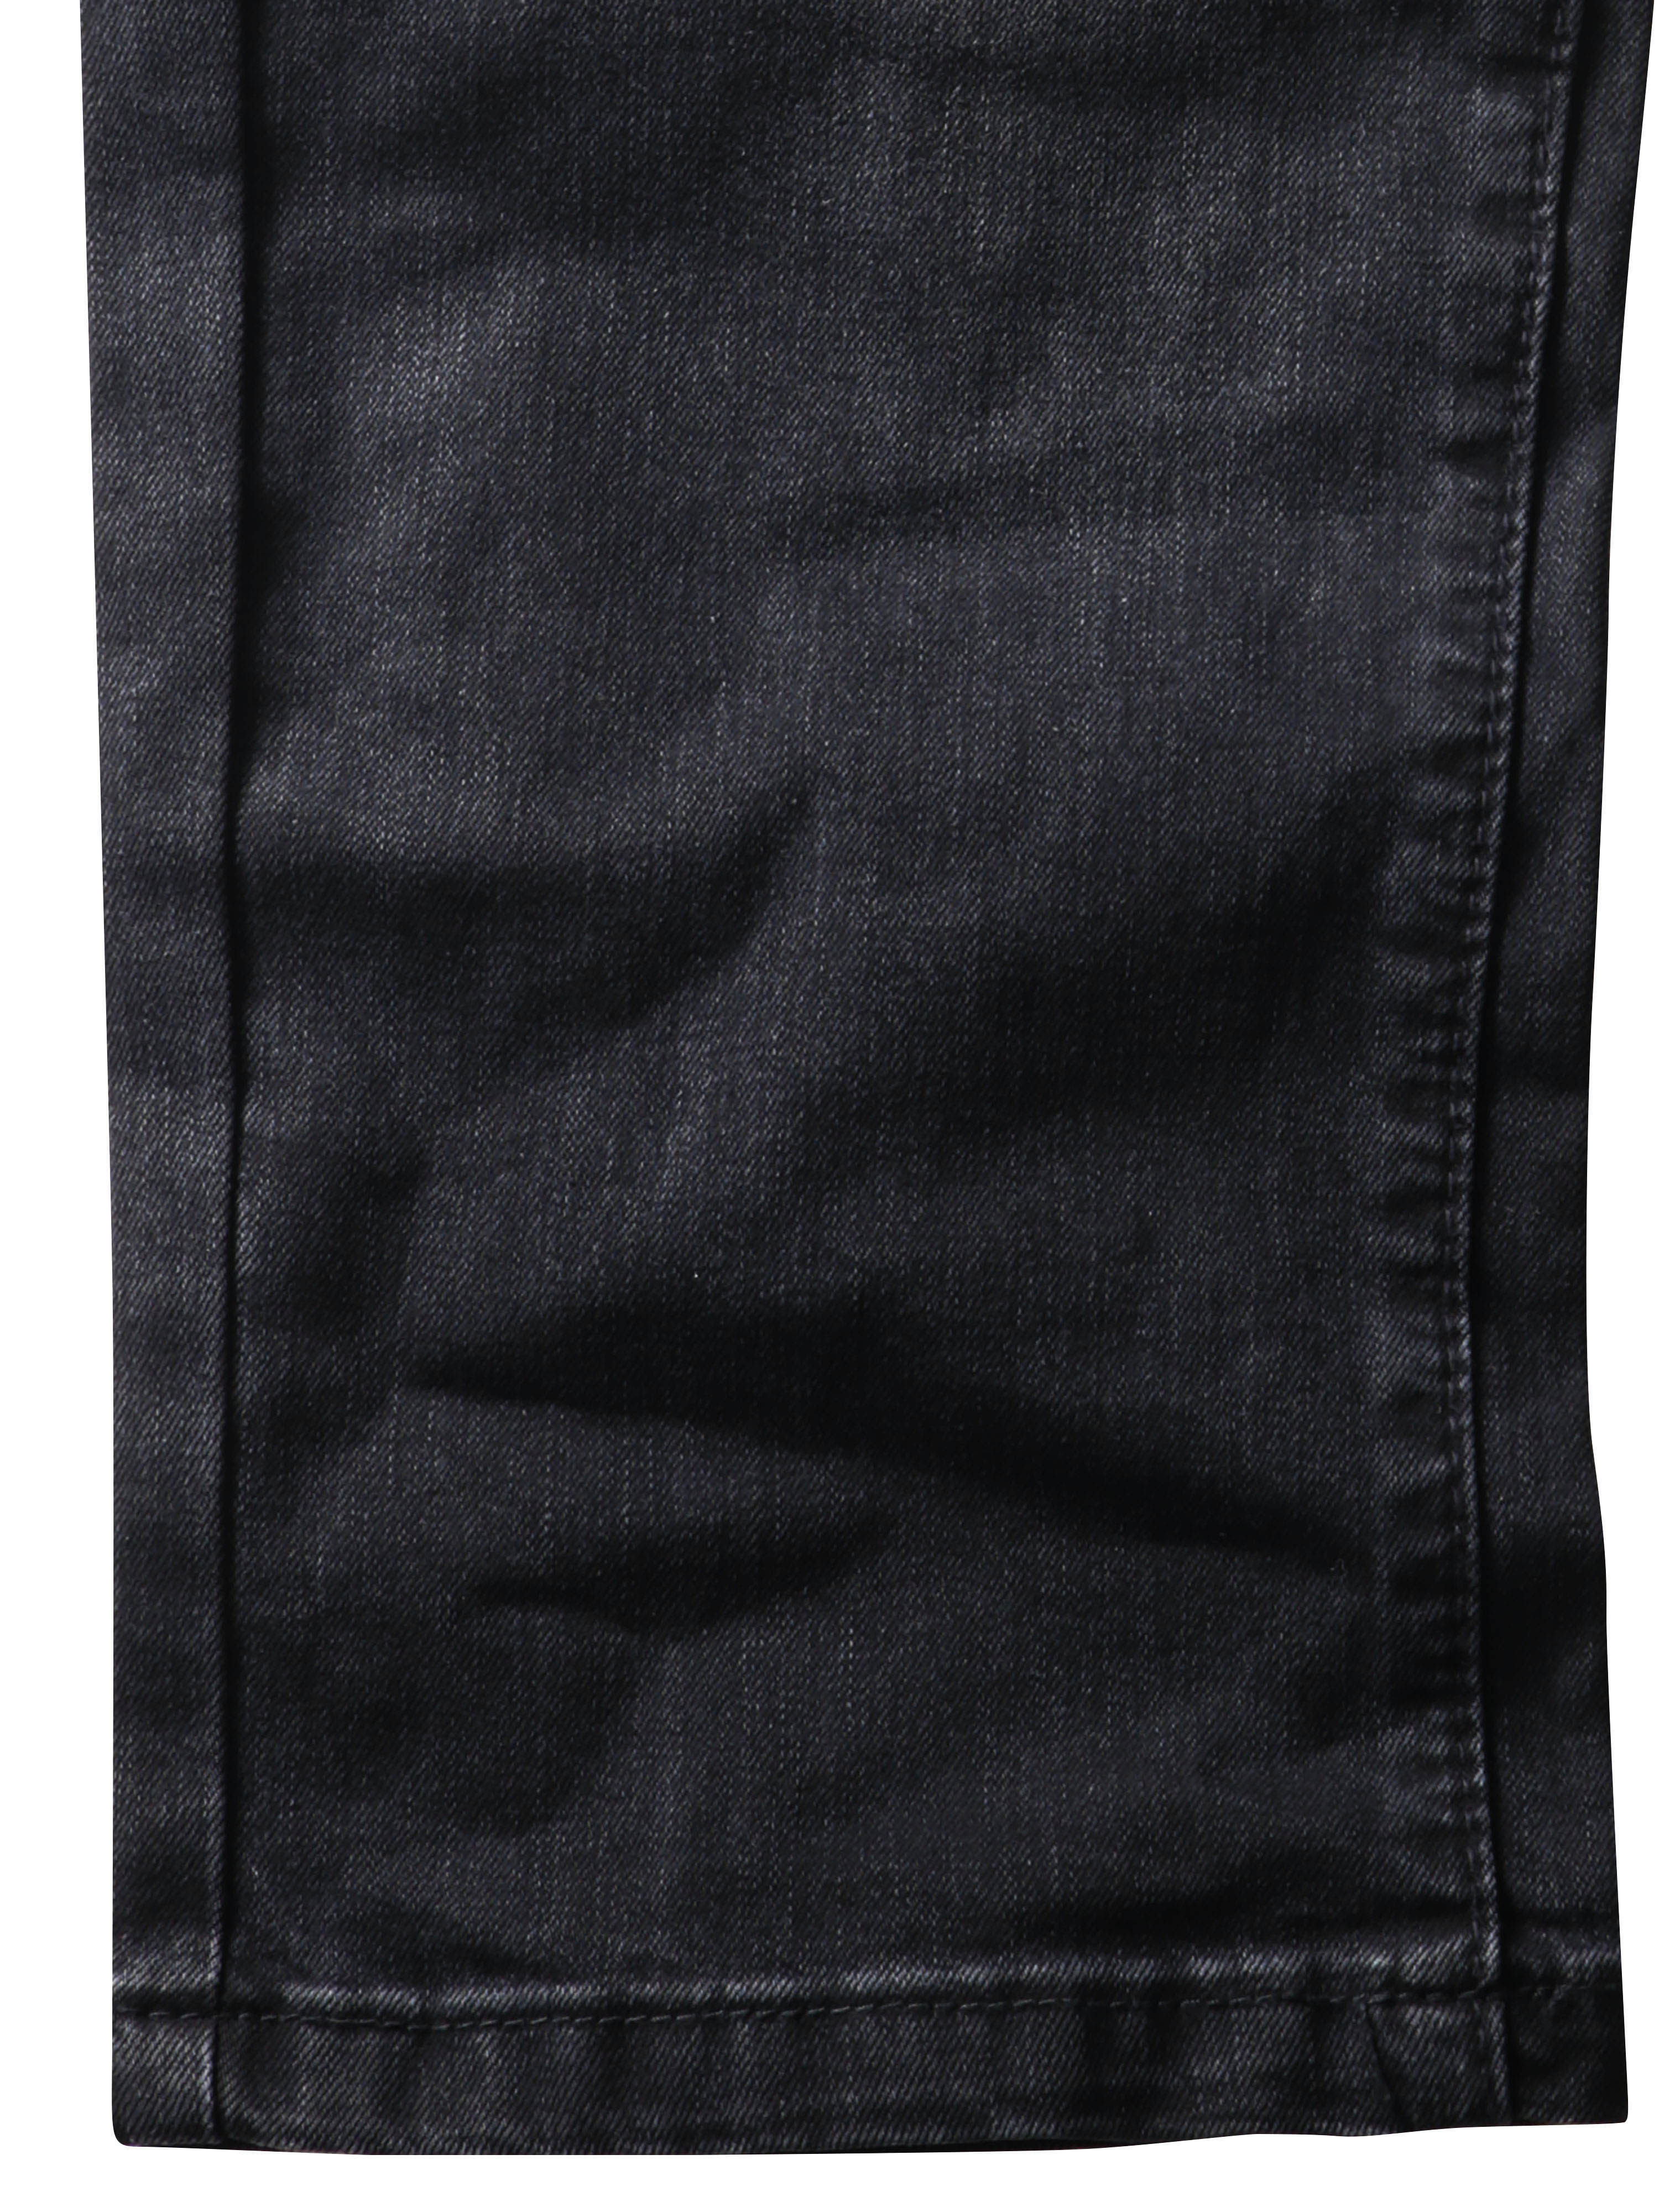 Ma Croix Mens Distressed Skinny Fit Denim Jeans with Zipper Pocket - image 4 of 6